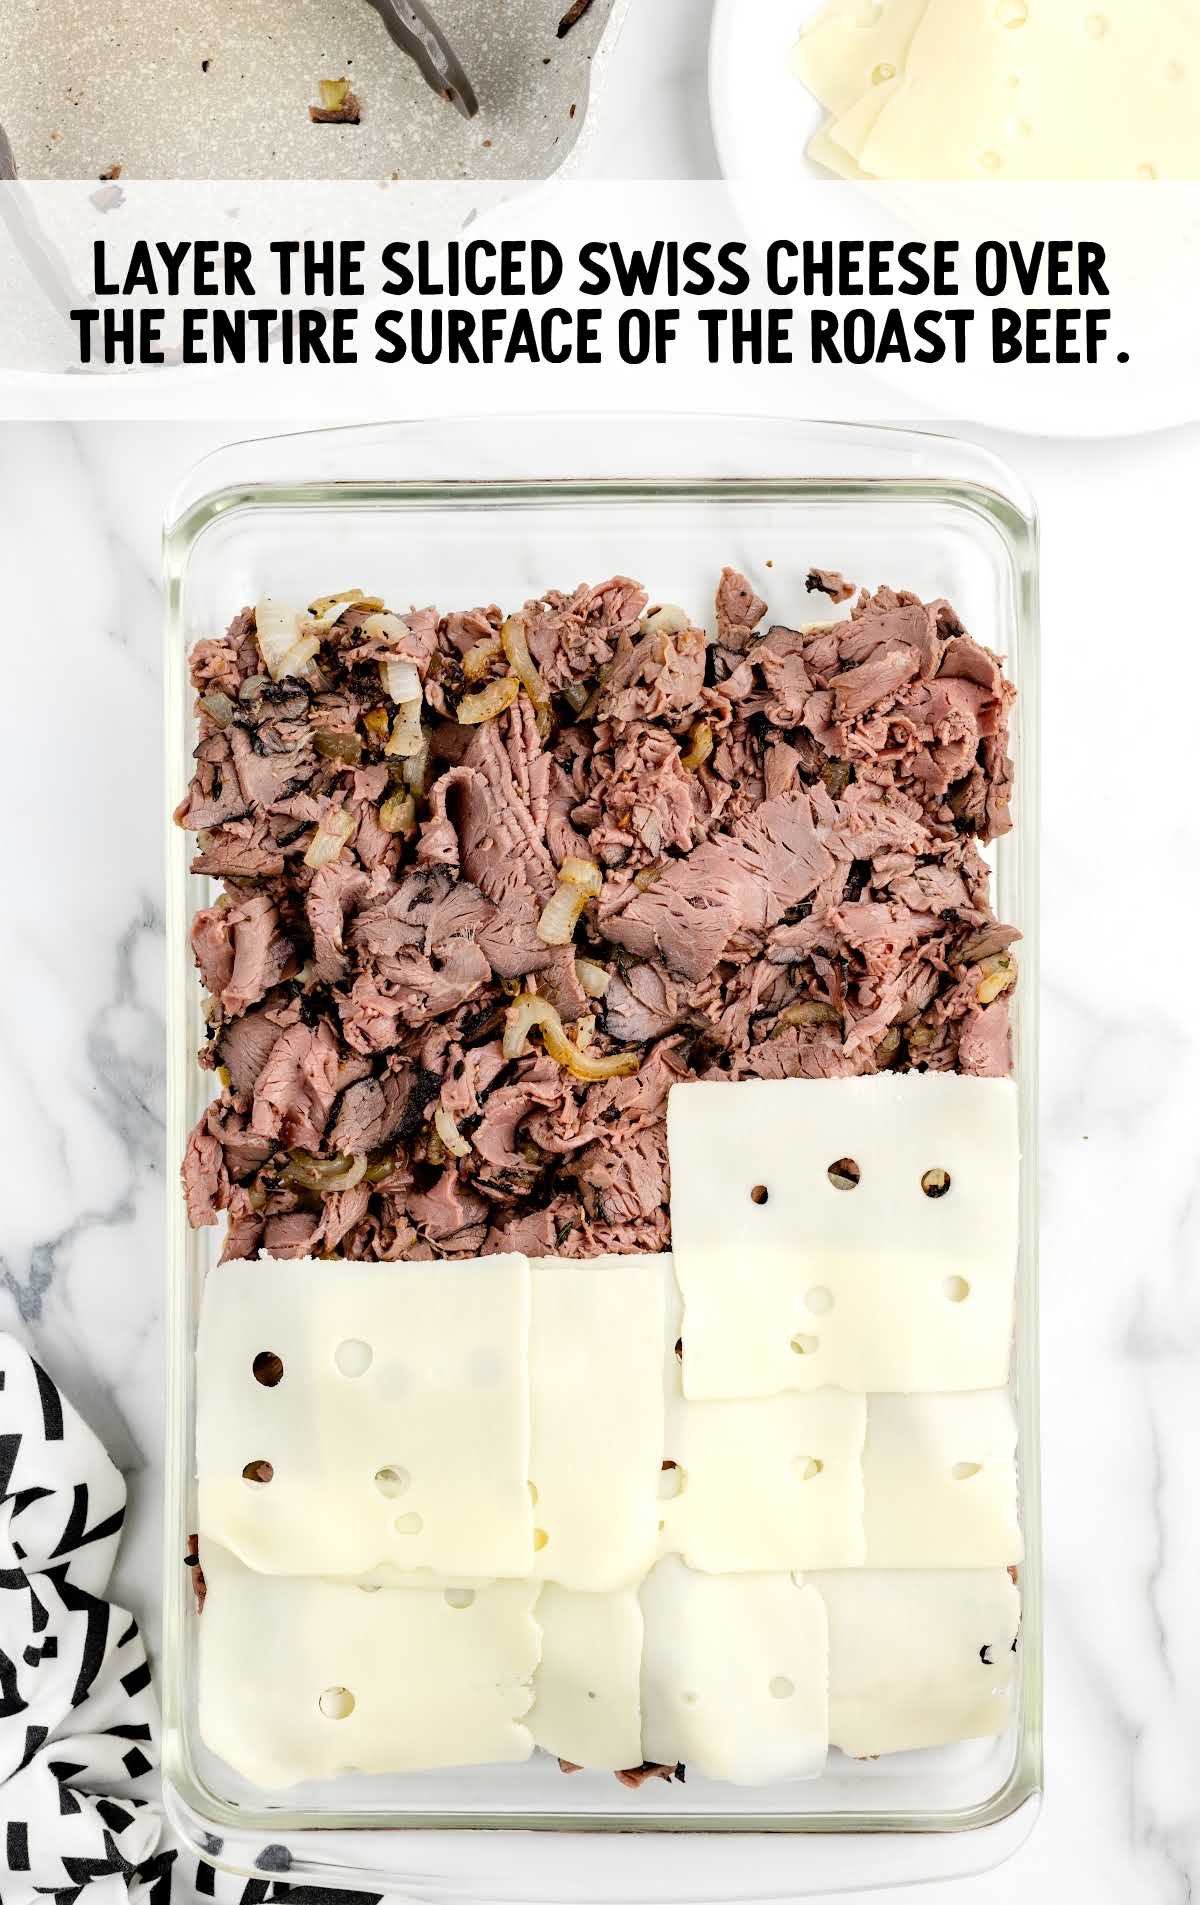 Swiss cheese layered over the entire surface of the roast beef